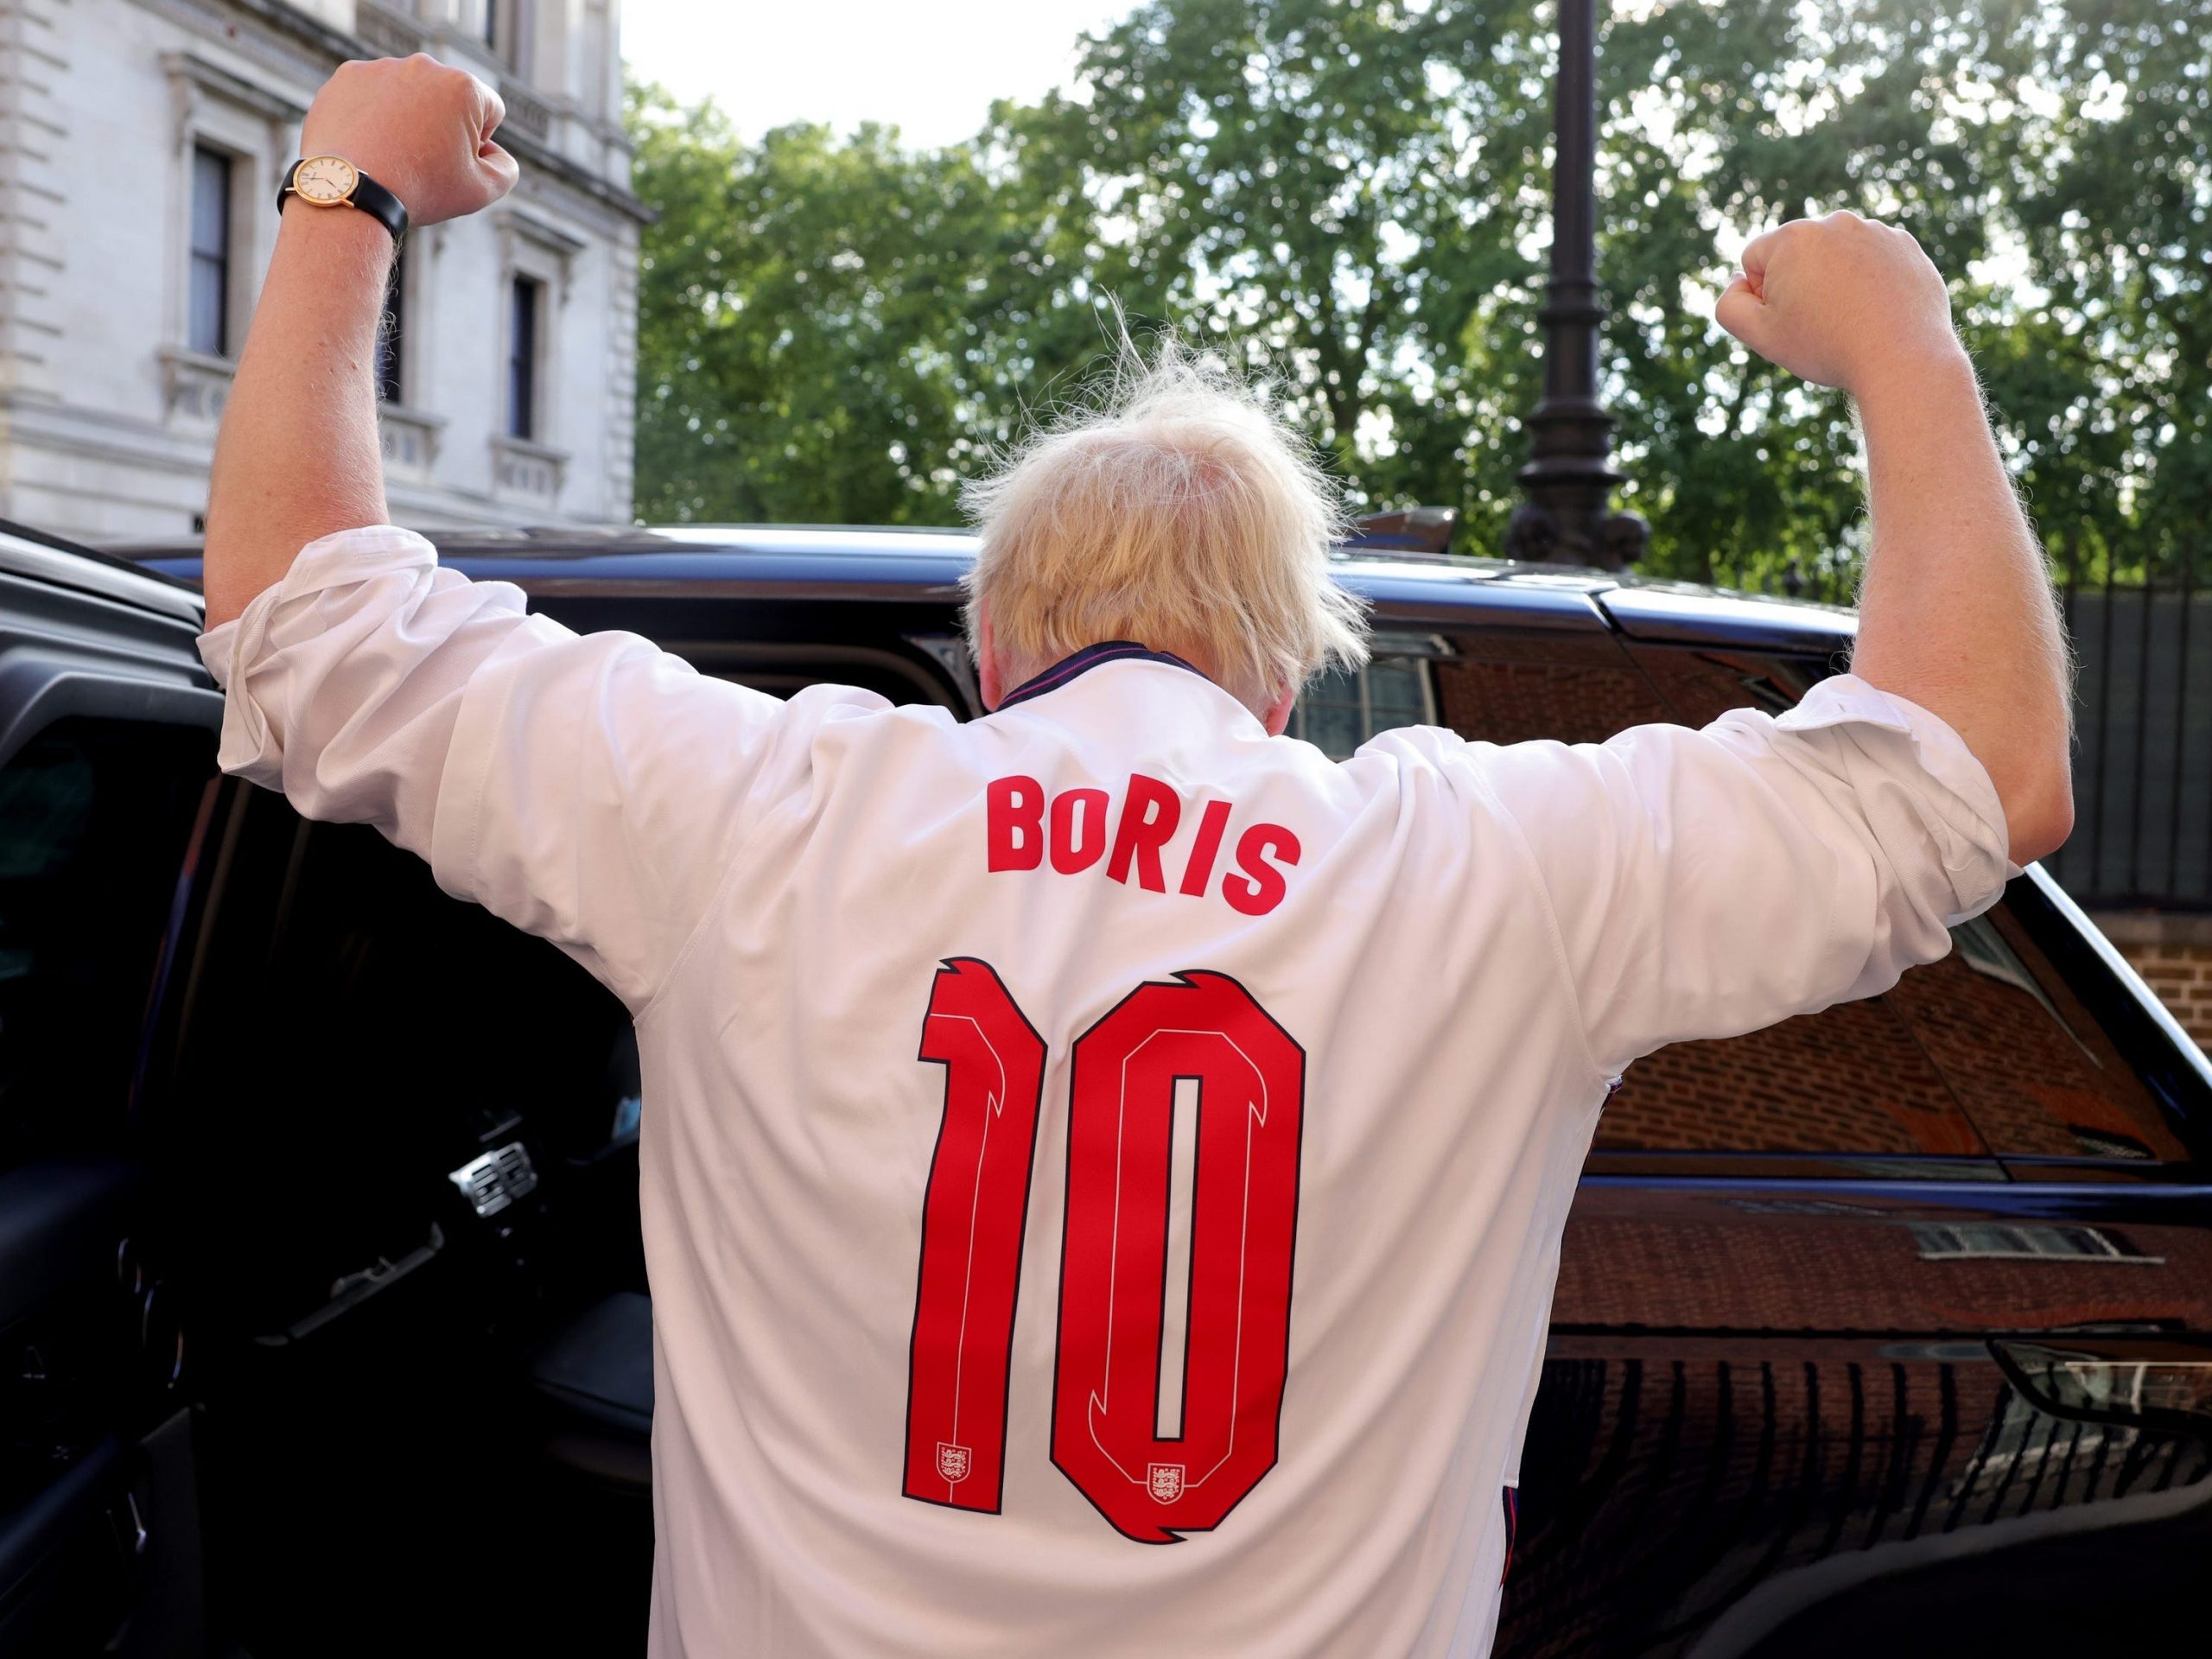 The back of UK Prime Minister Boris Johnson, who is wearing a football t-shirt numbered 10 saying "Boris" on the back.